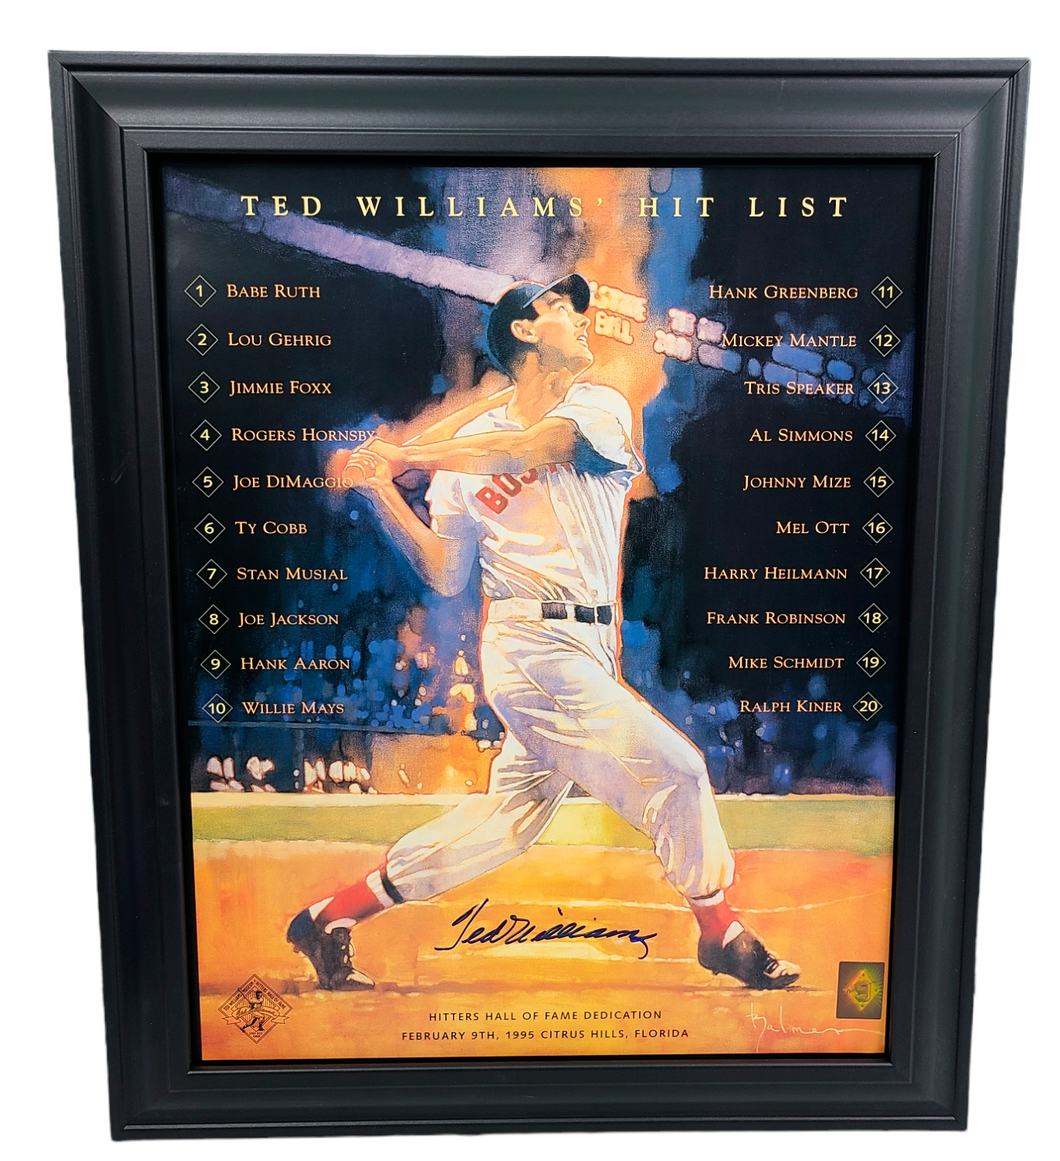 Ted Williams Autographed Framed Boston Red Sox Hit List Photo Green Diamond